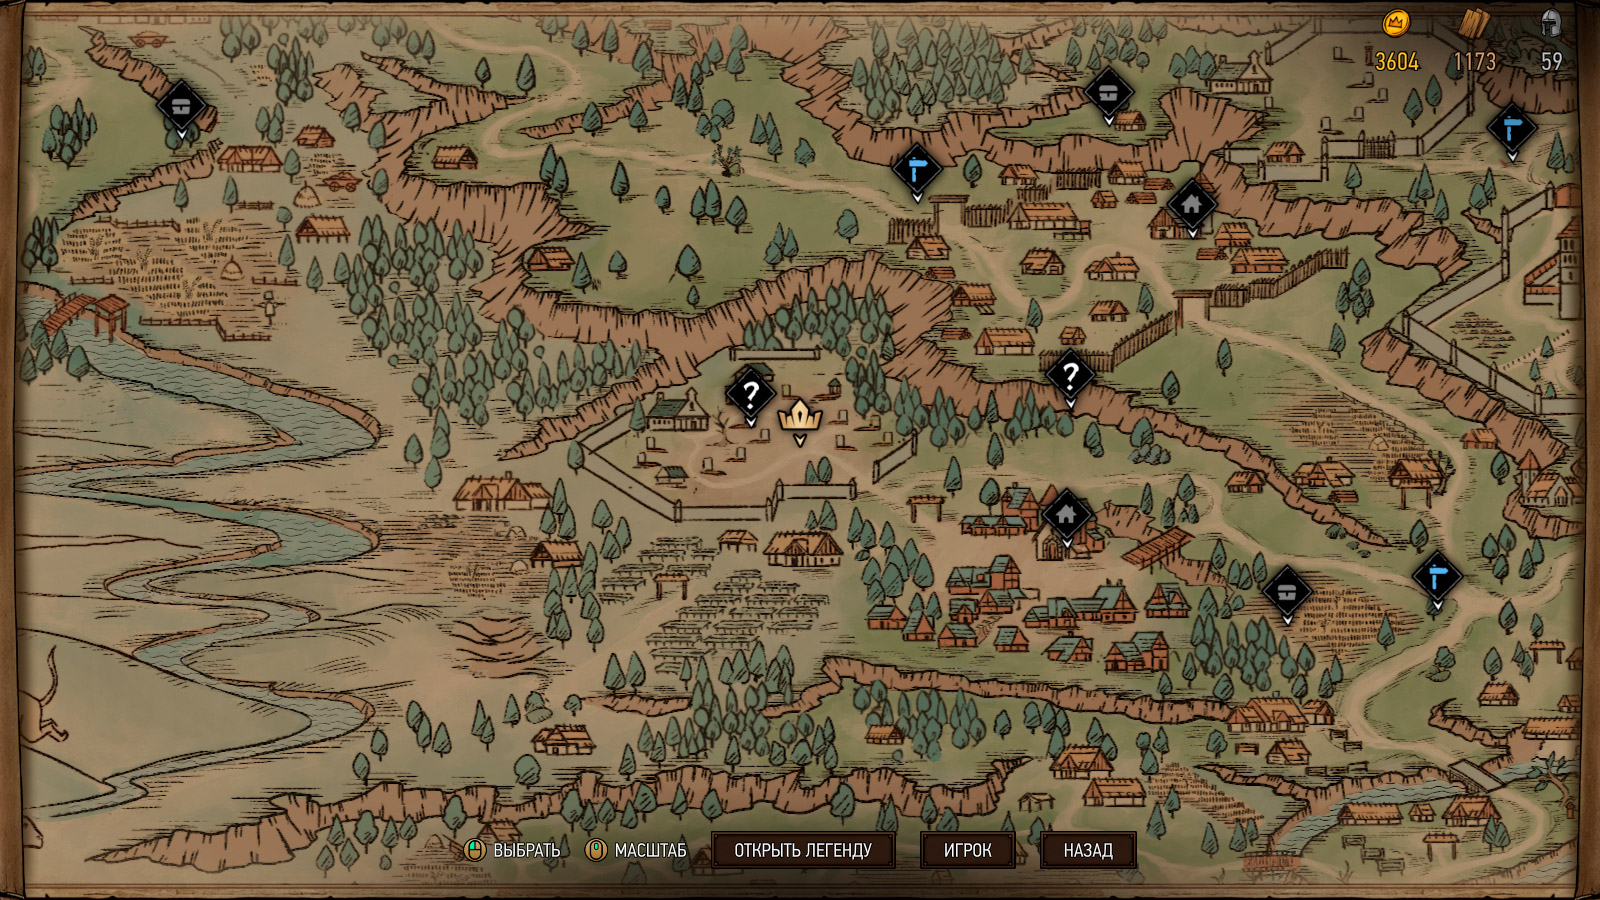 All Golden Chests in Aedirn 9/9 - Second Map in Thronebreaker: The Witcher  Tales 